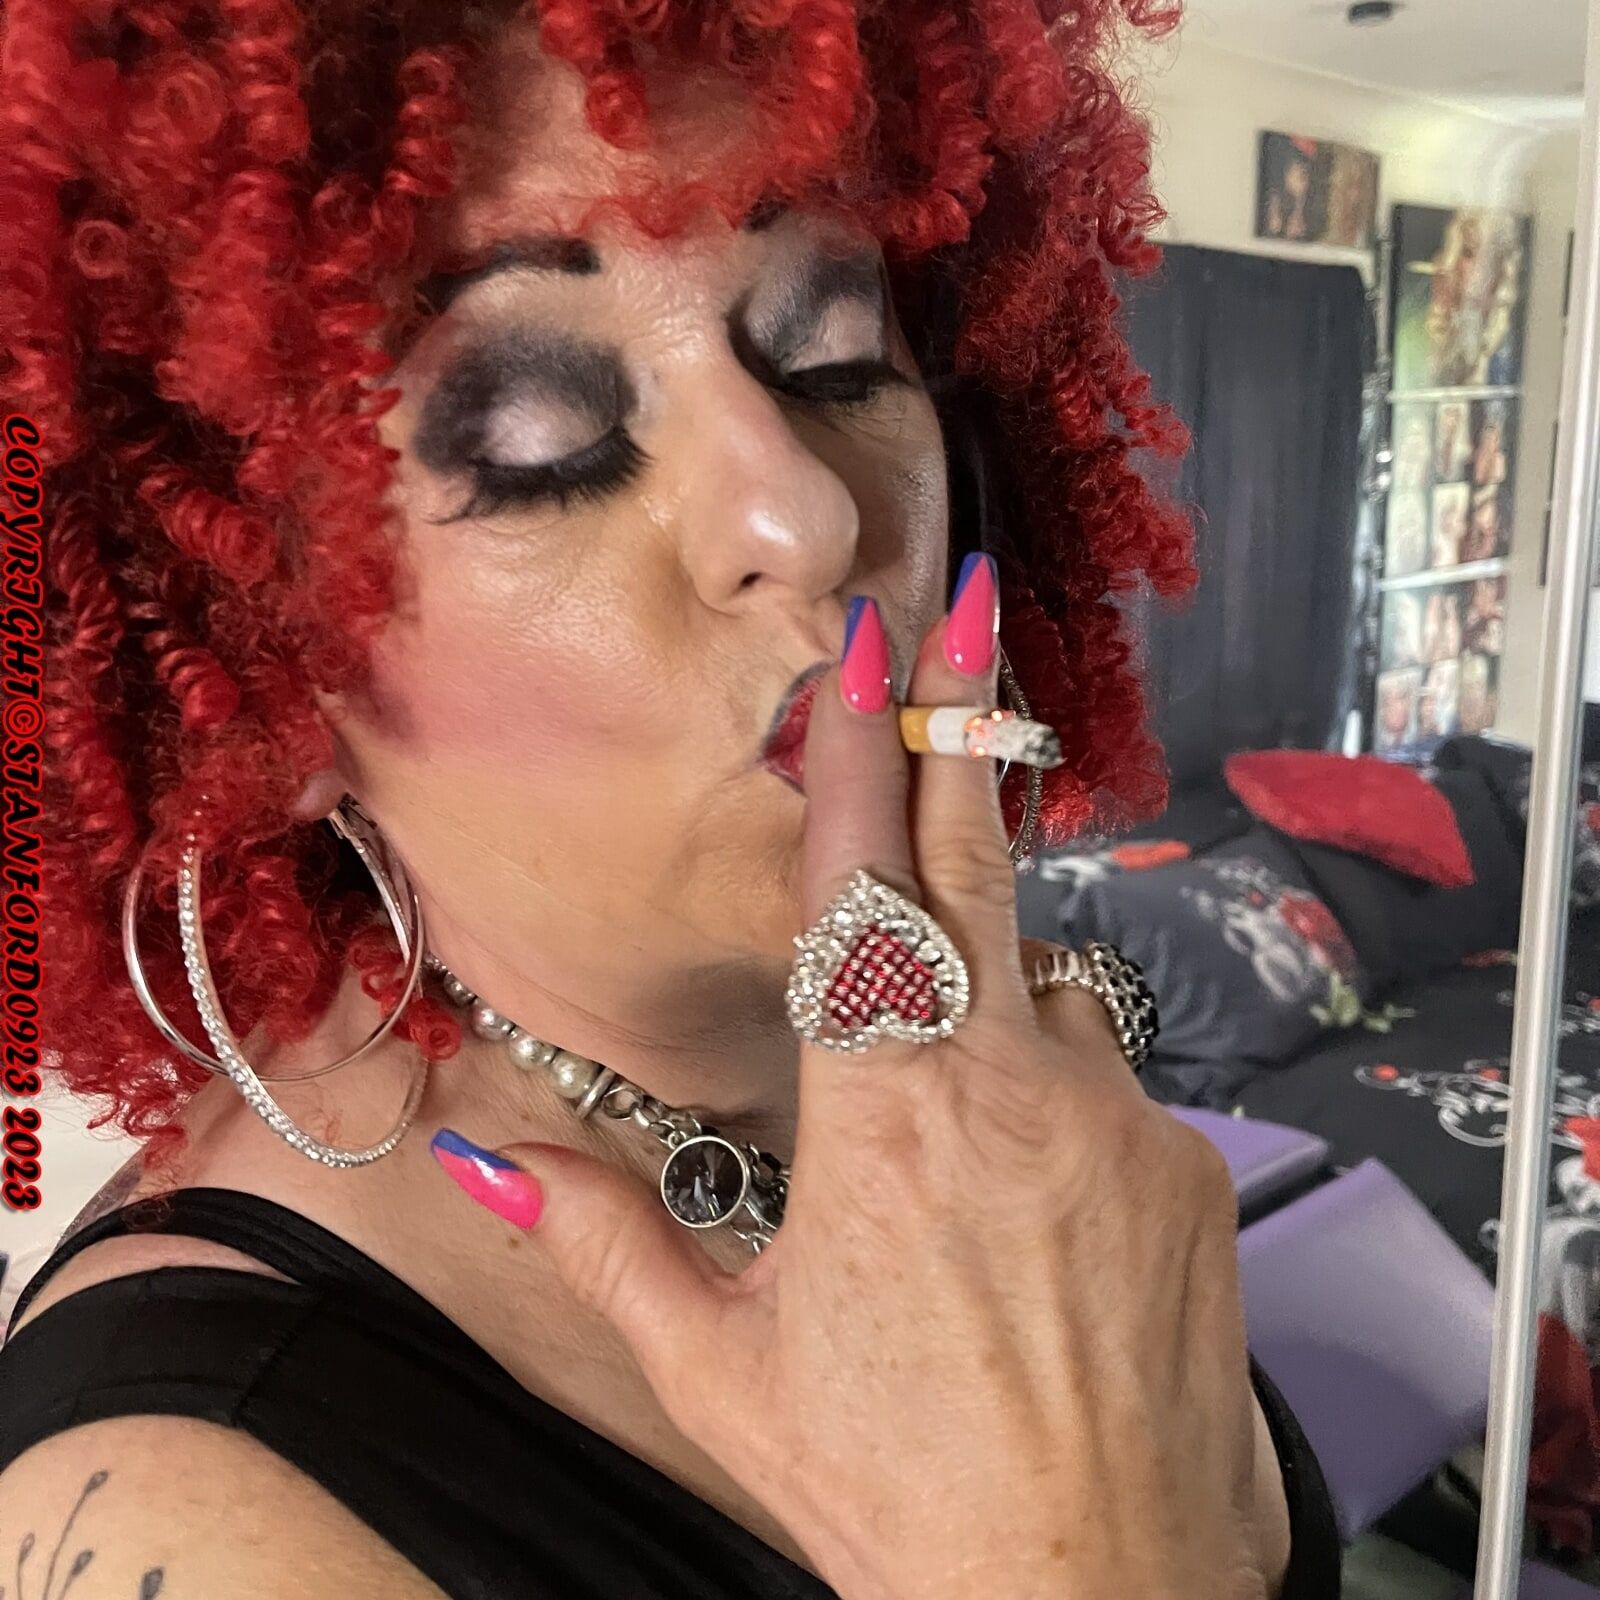 SHIRLEY RED WHORE #34